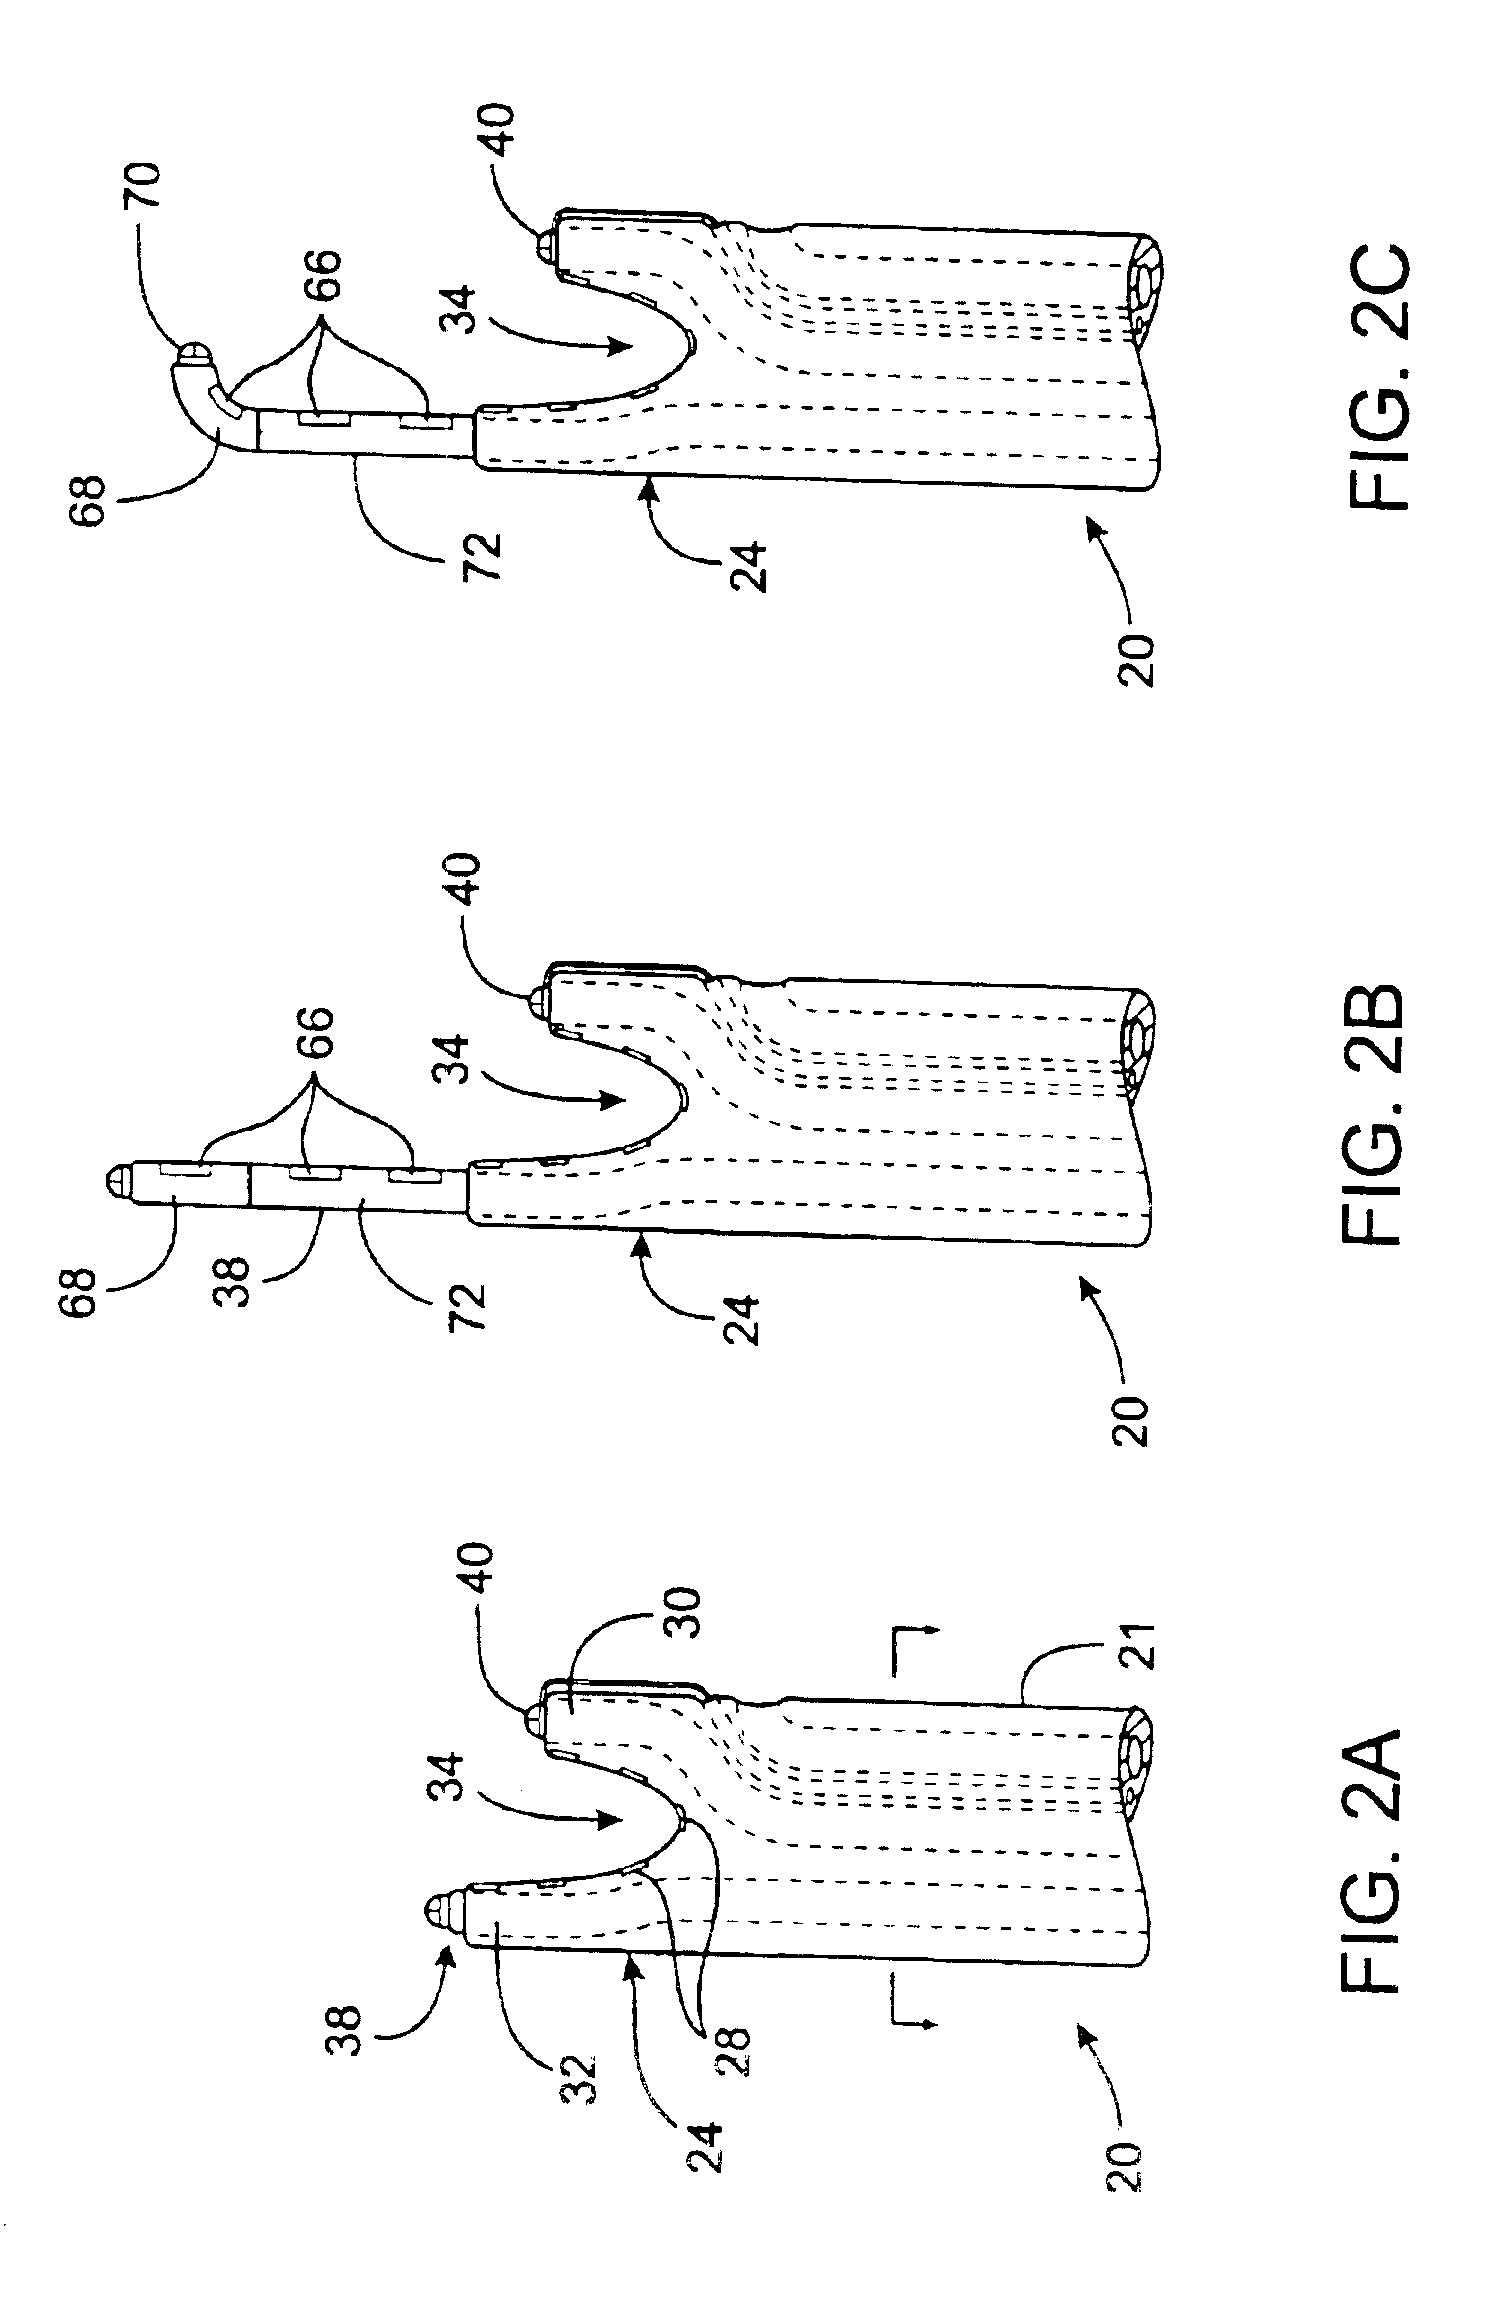 Apparatus and method for diagnosis and therapy of electrophysiological disease